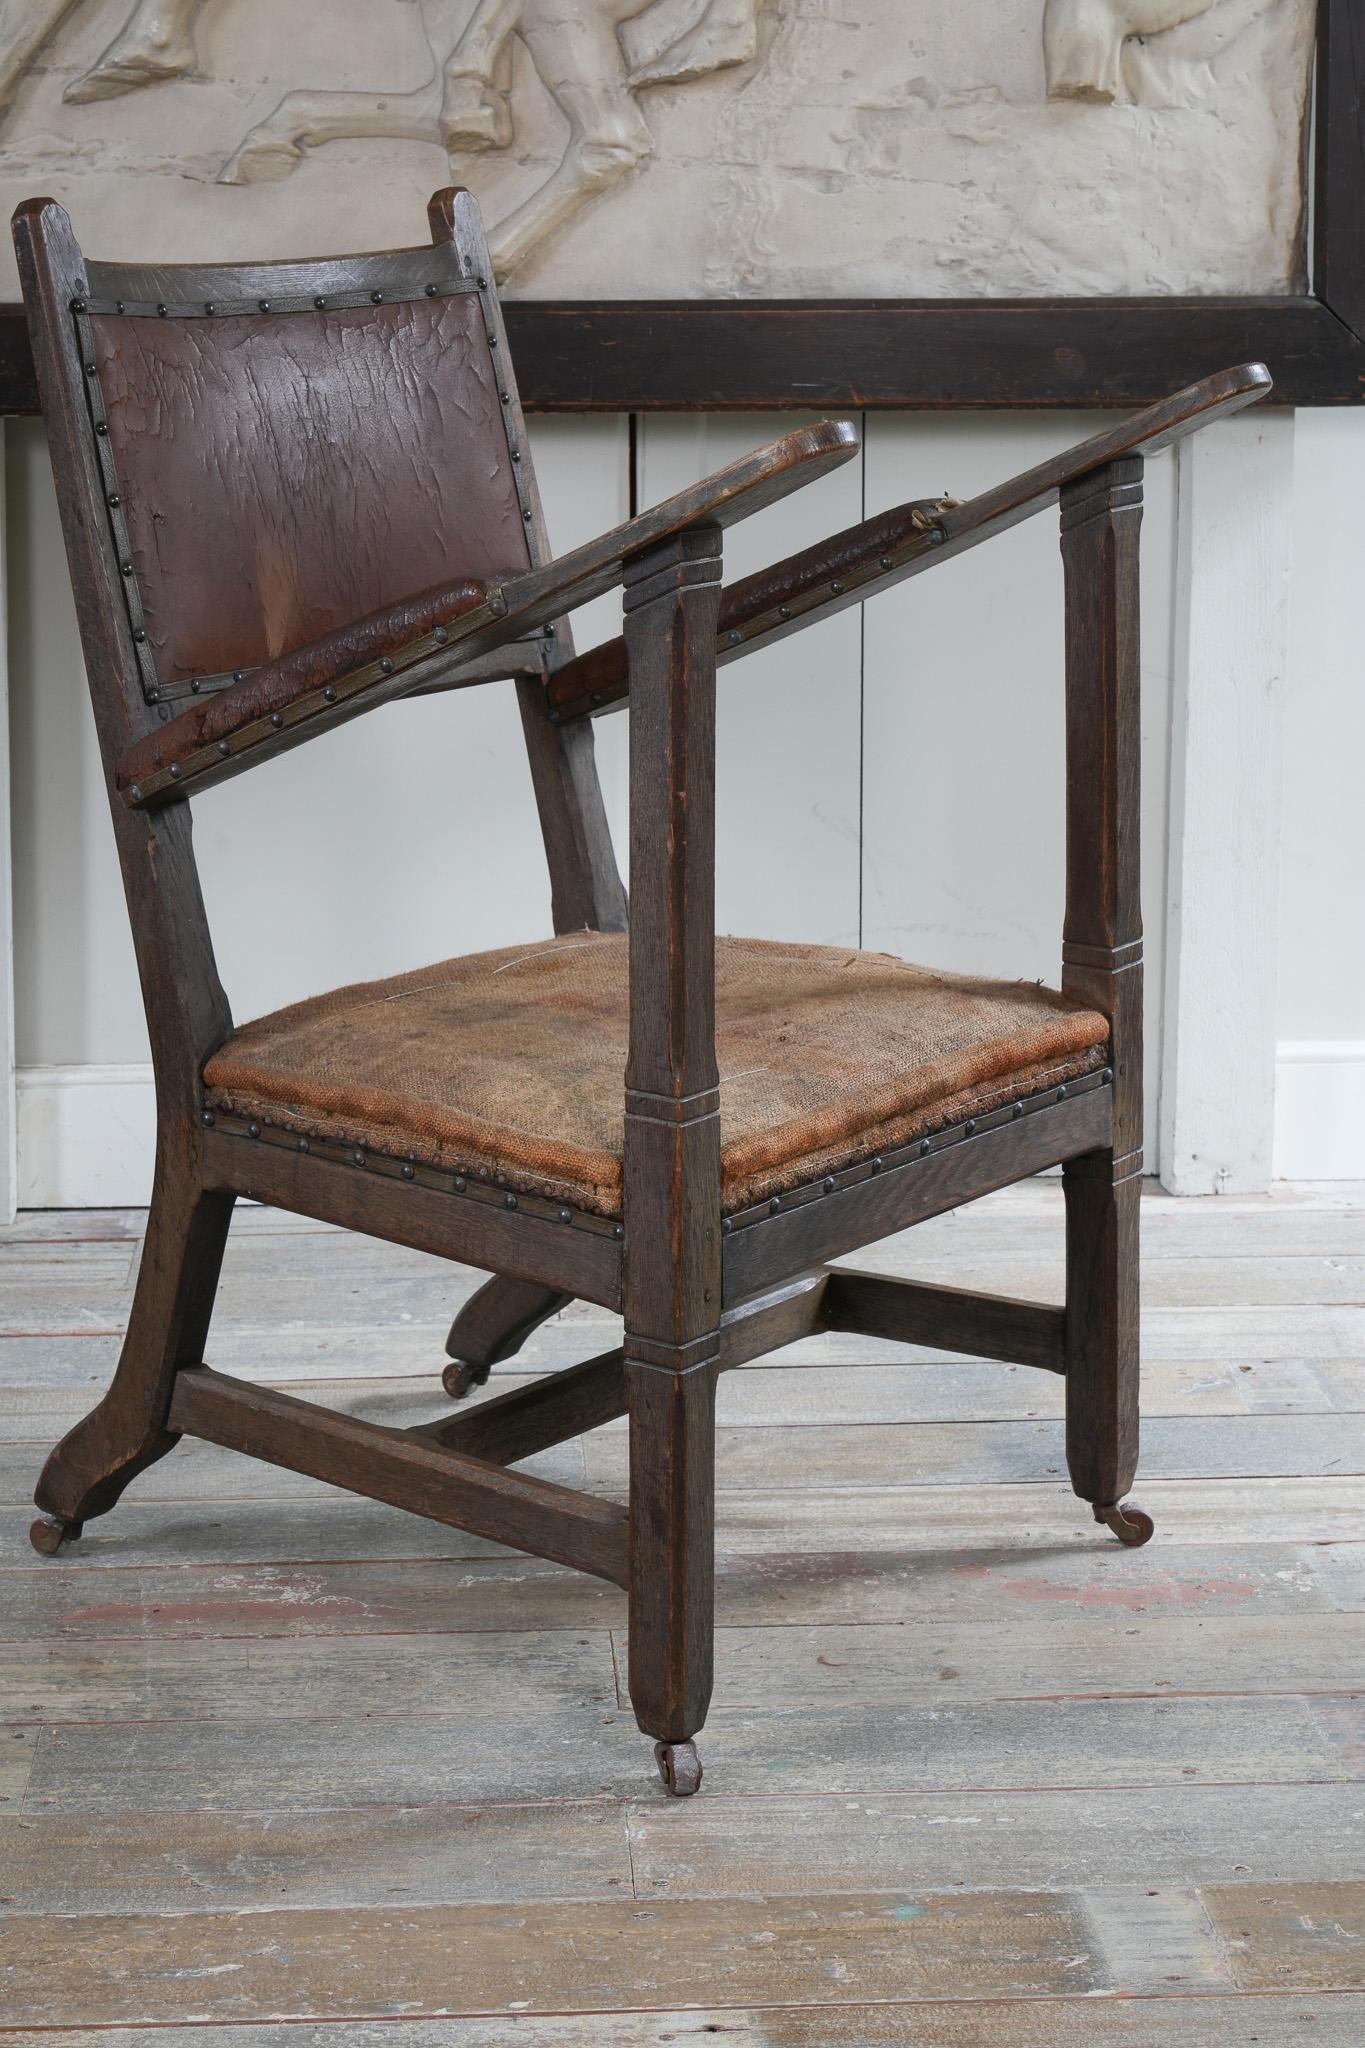 A rare example produced in the English Gothic taste.

Dry oak frame with remnants of the original leather upholstery.